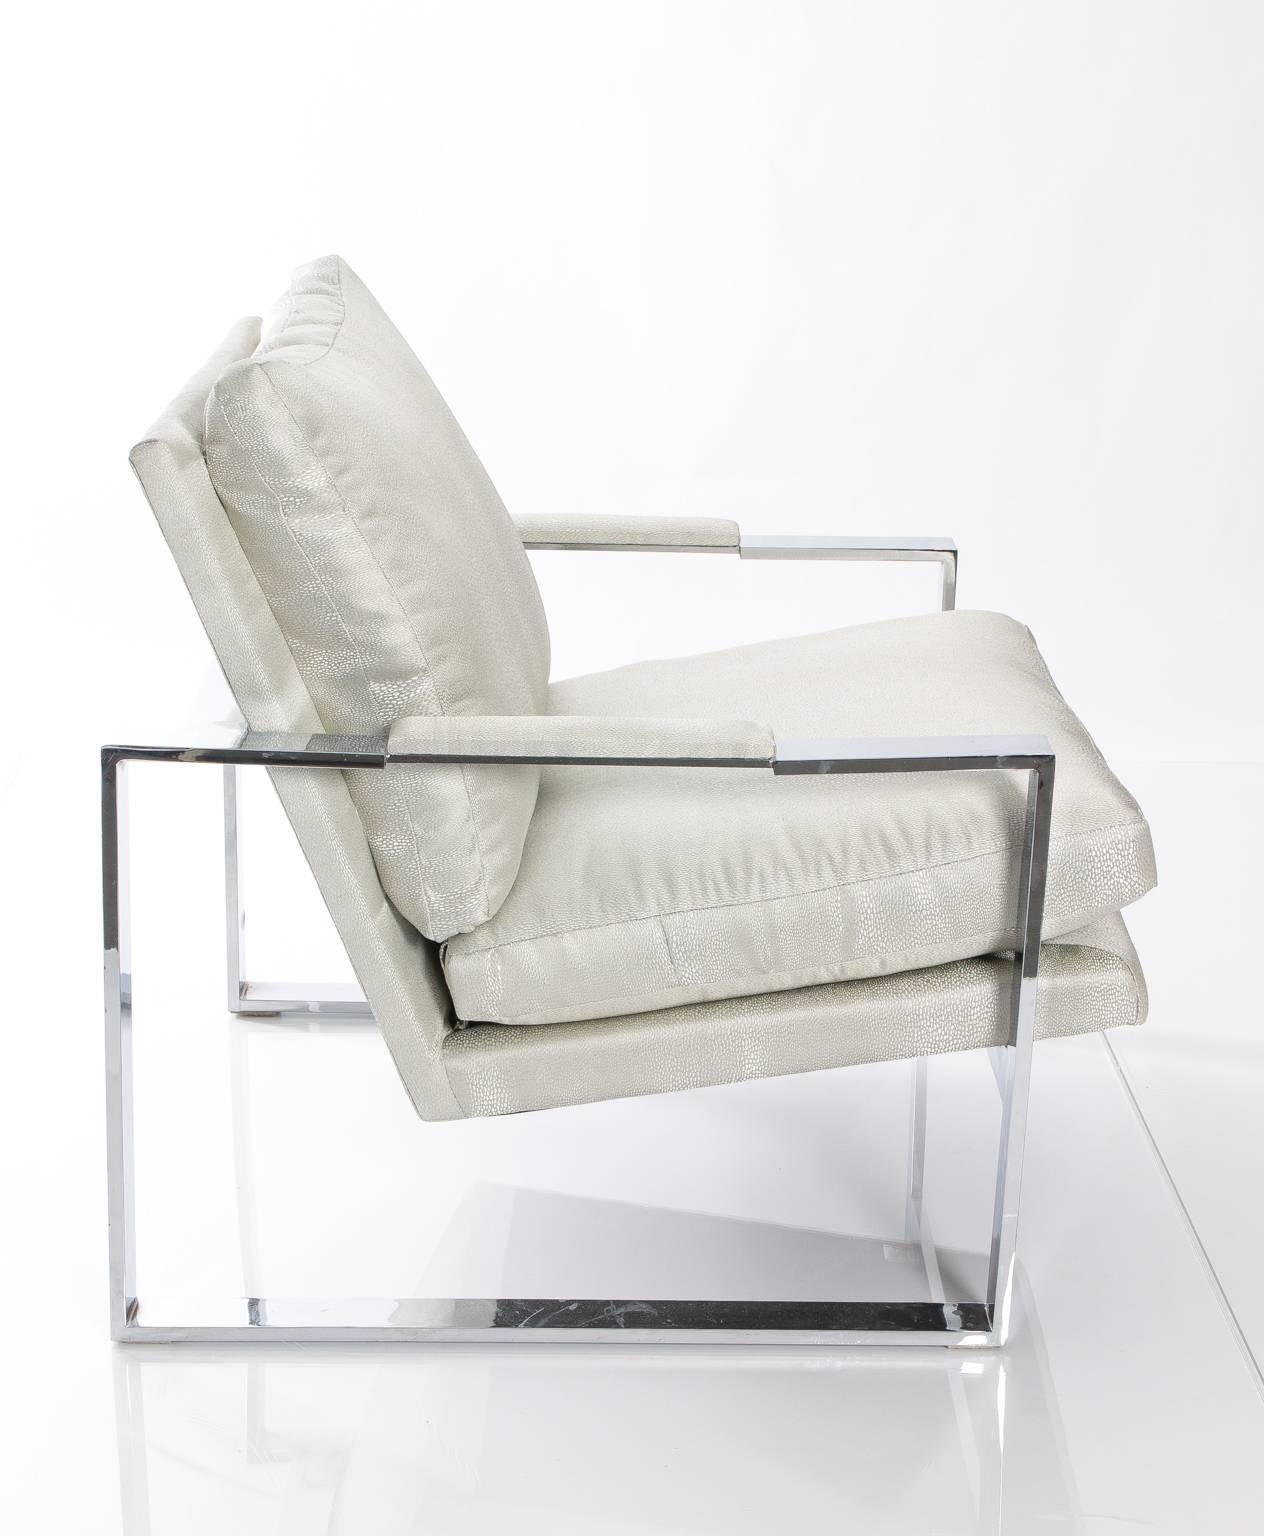 Pair of Milo Baughman upholstered chairs with chrome.
   